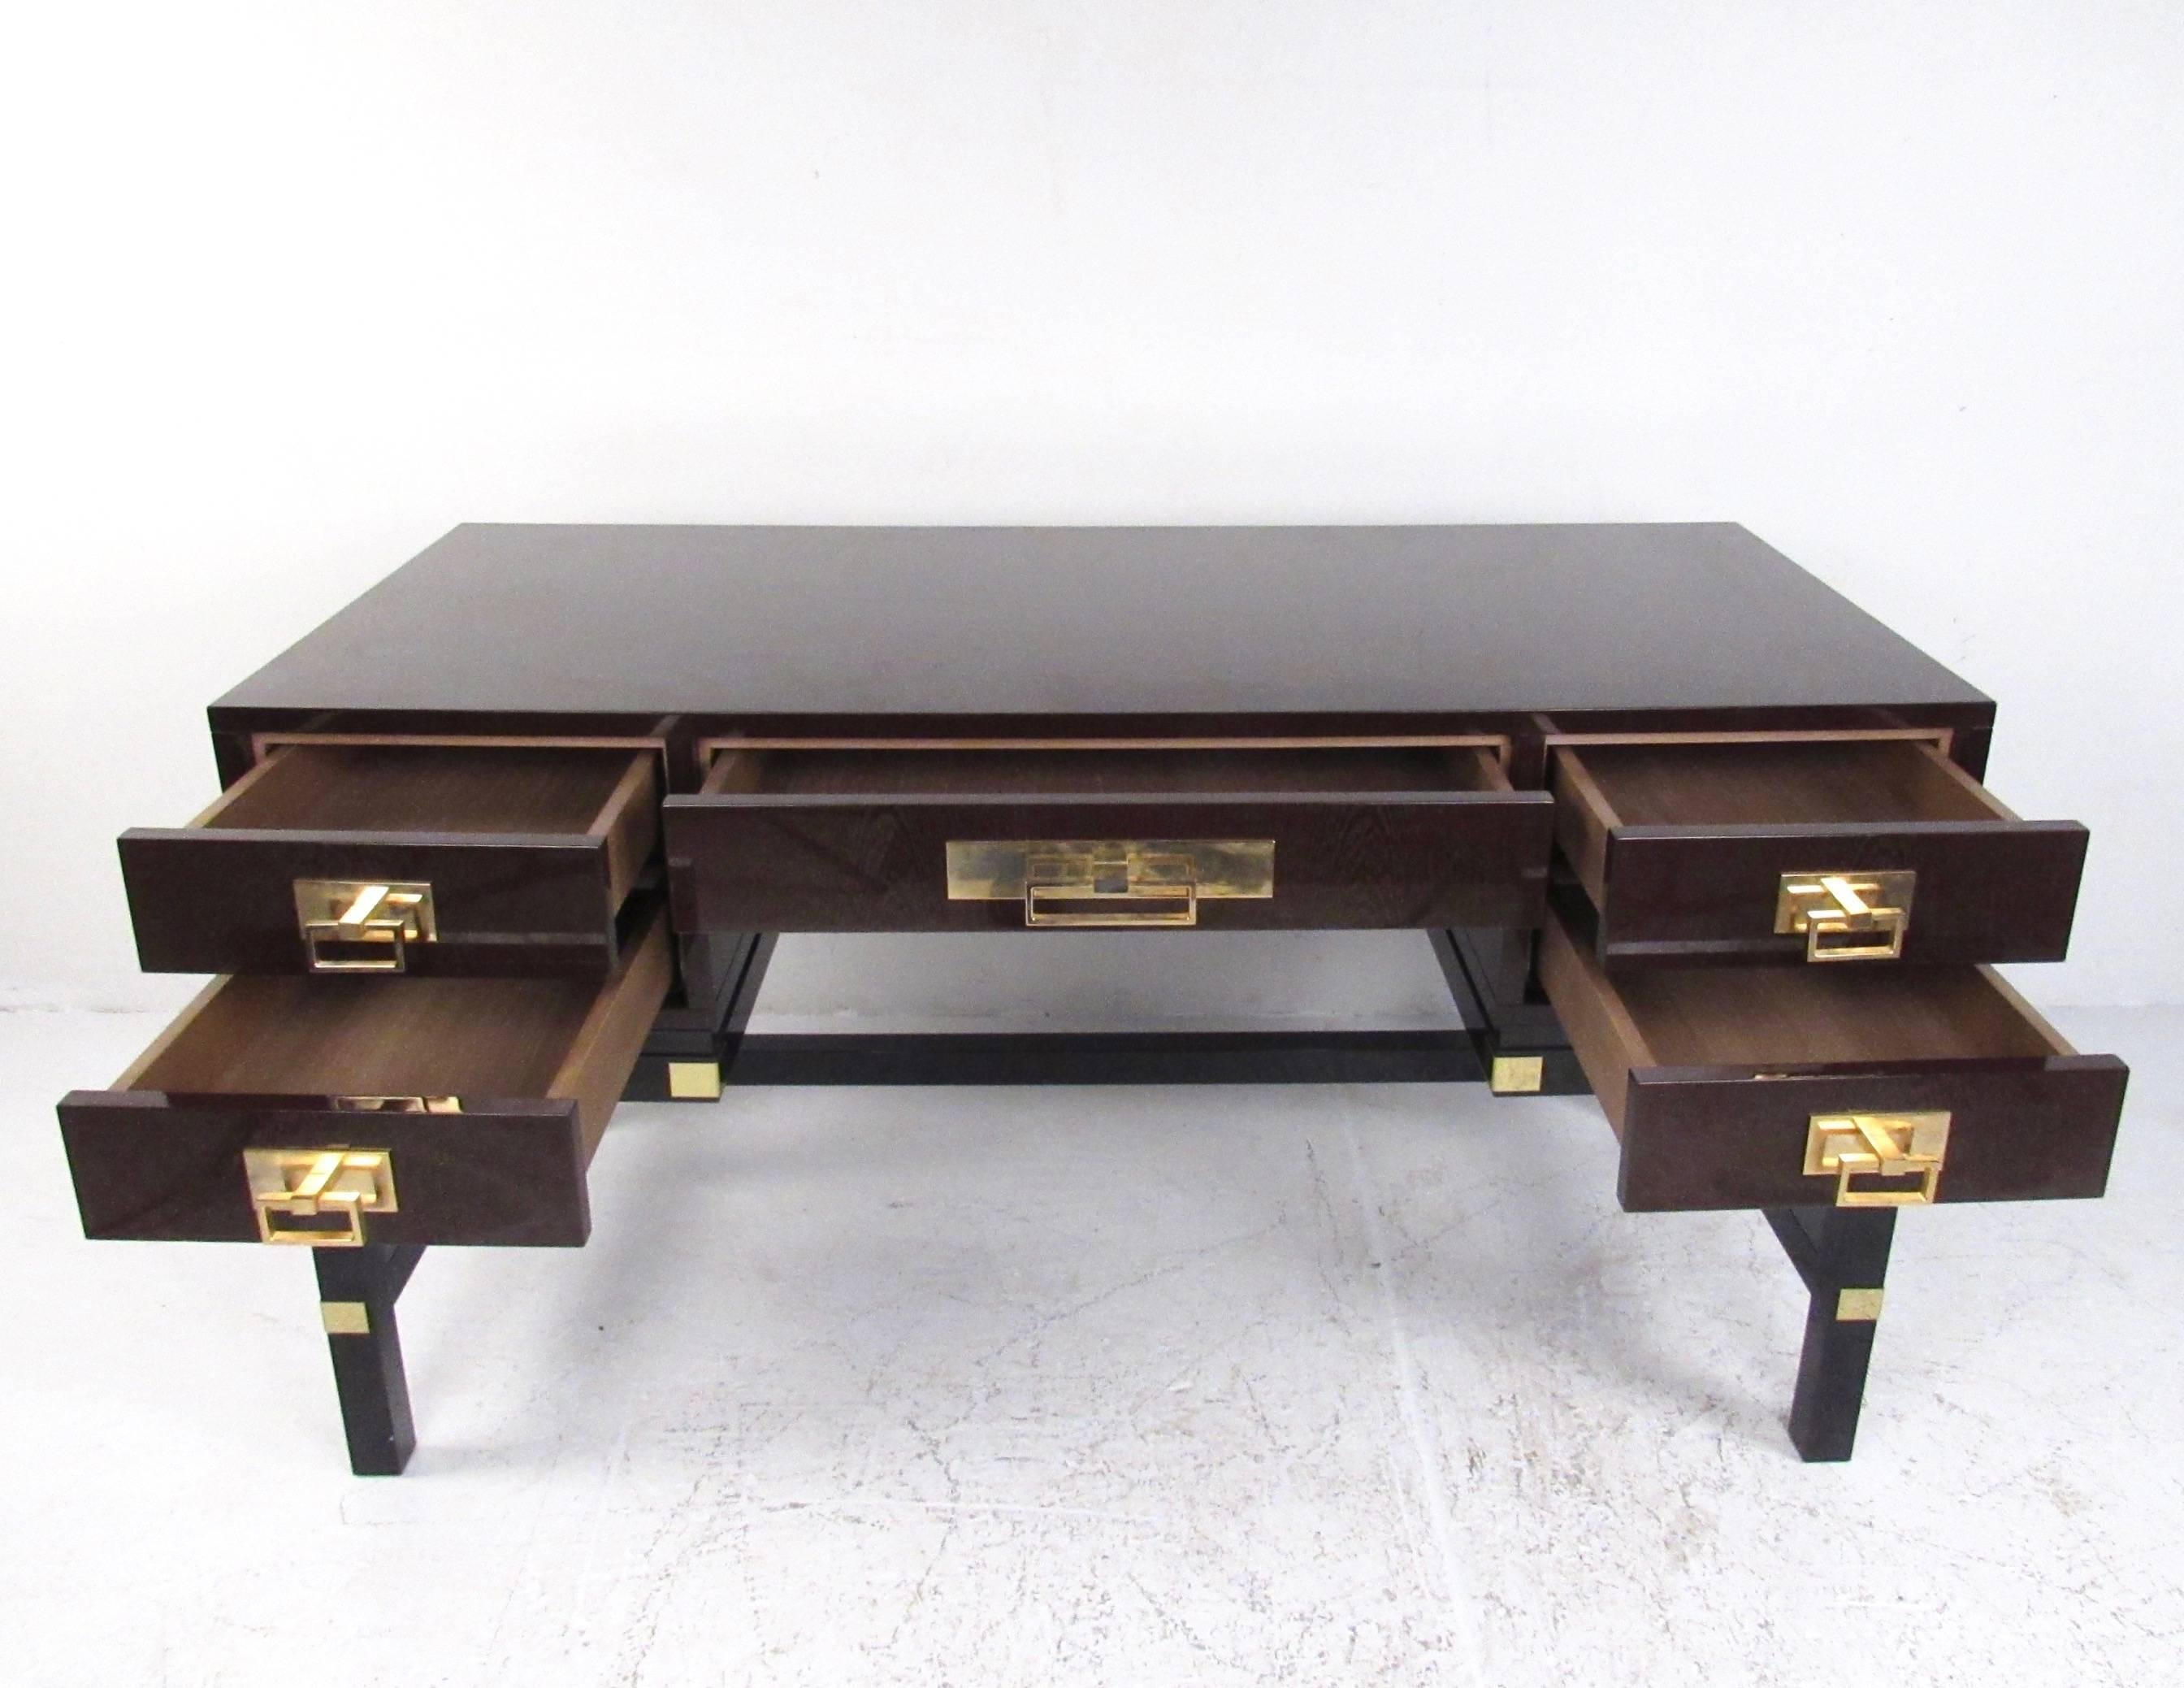 This stunning lacquered mahogany desk features classic campaign style design with spacious drawers and eye-catching brass trim. Sturdy and impressive executive desk features finished back and quality construction, perfect for home or business